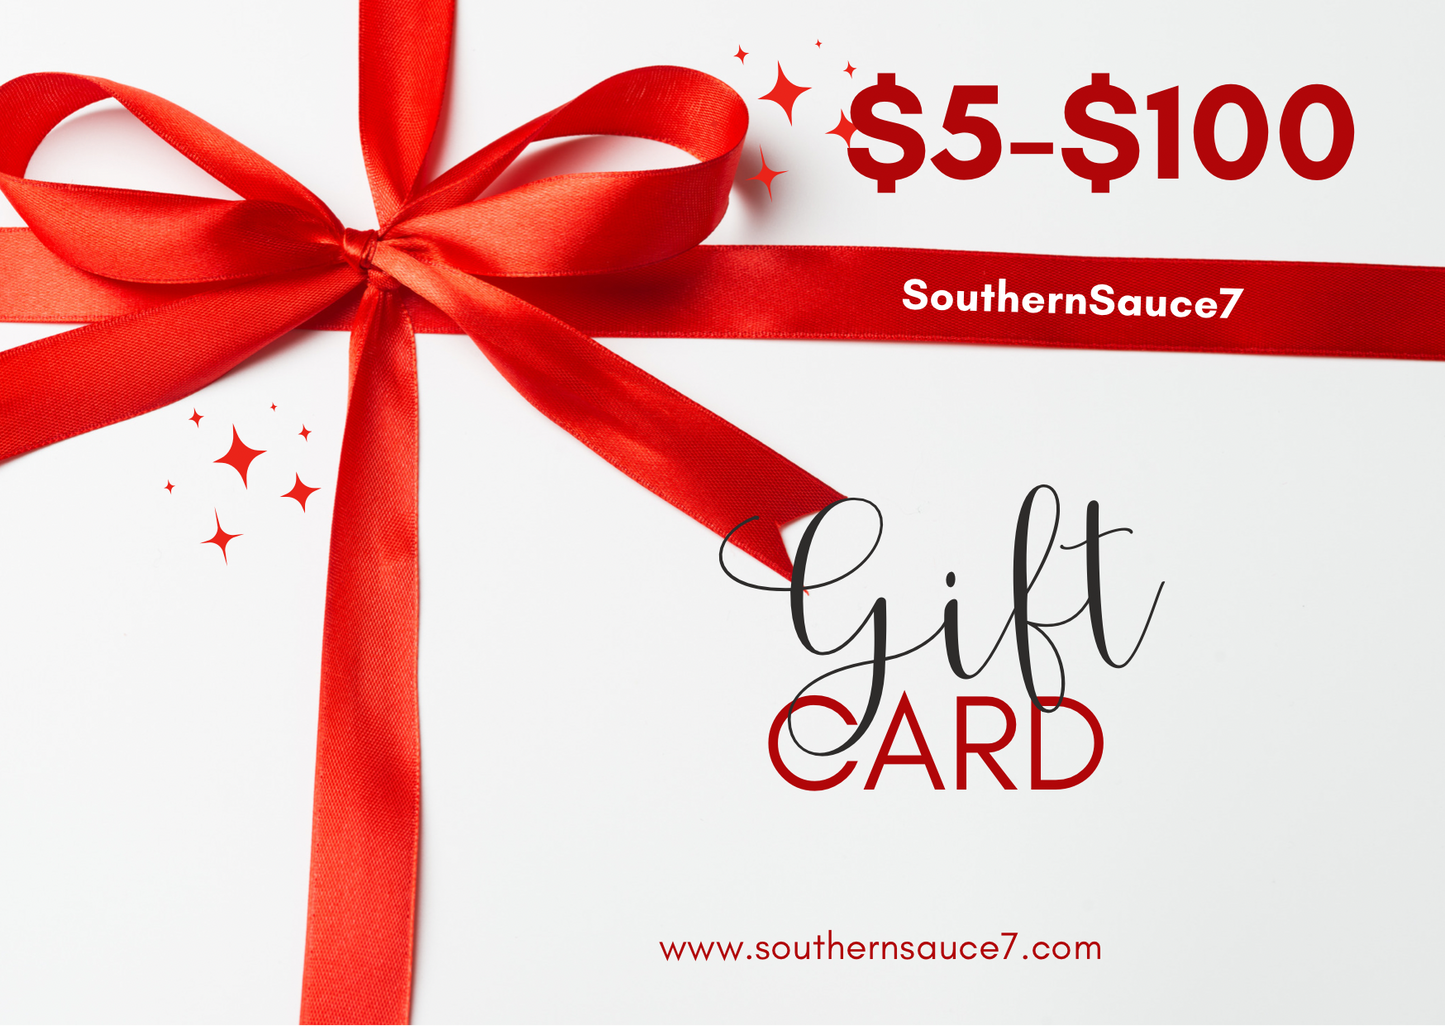 SouthernSauce7 Gift Card